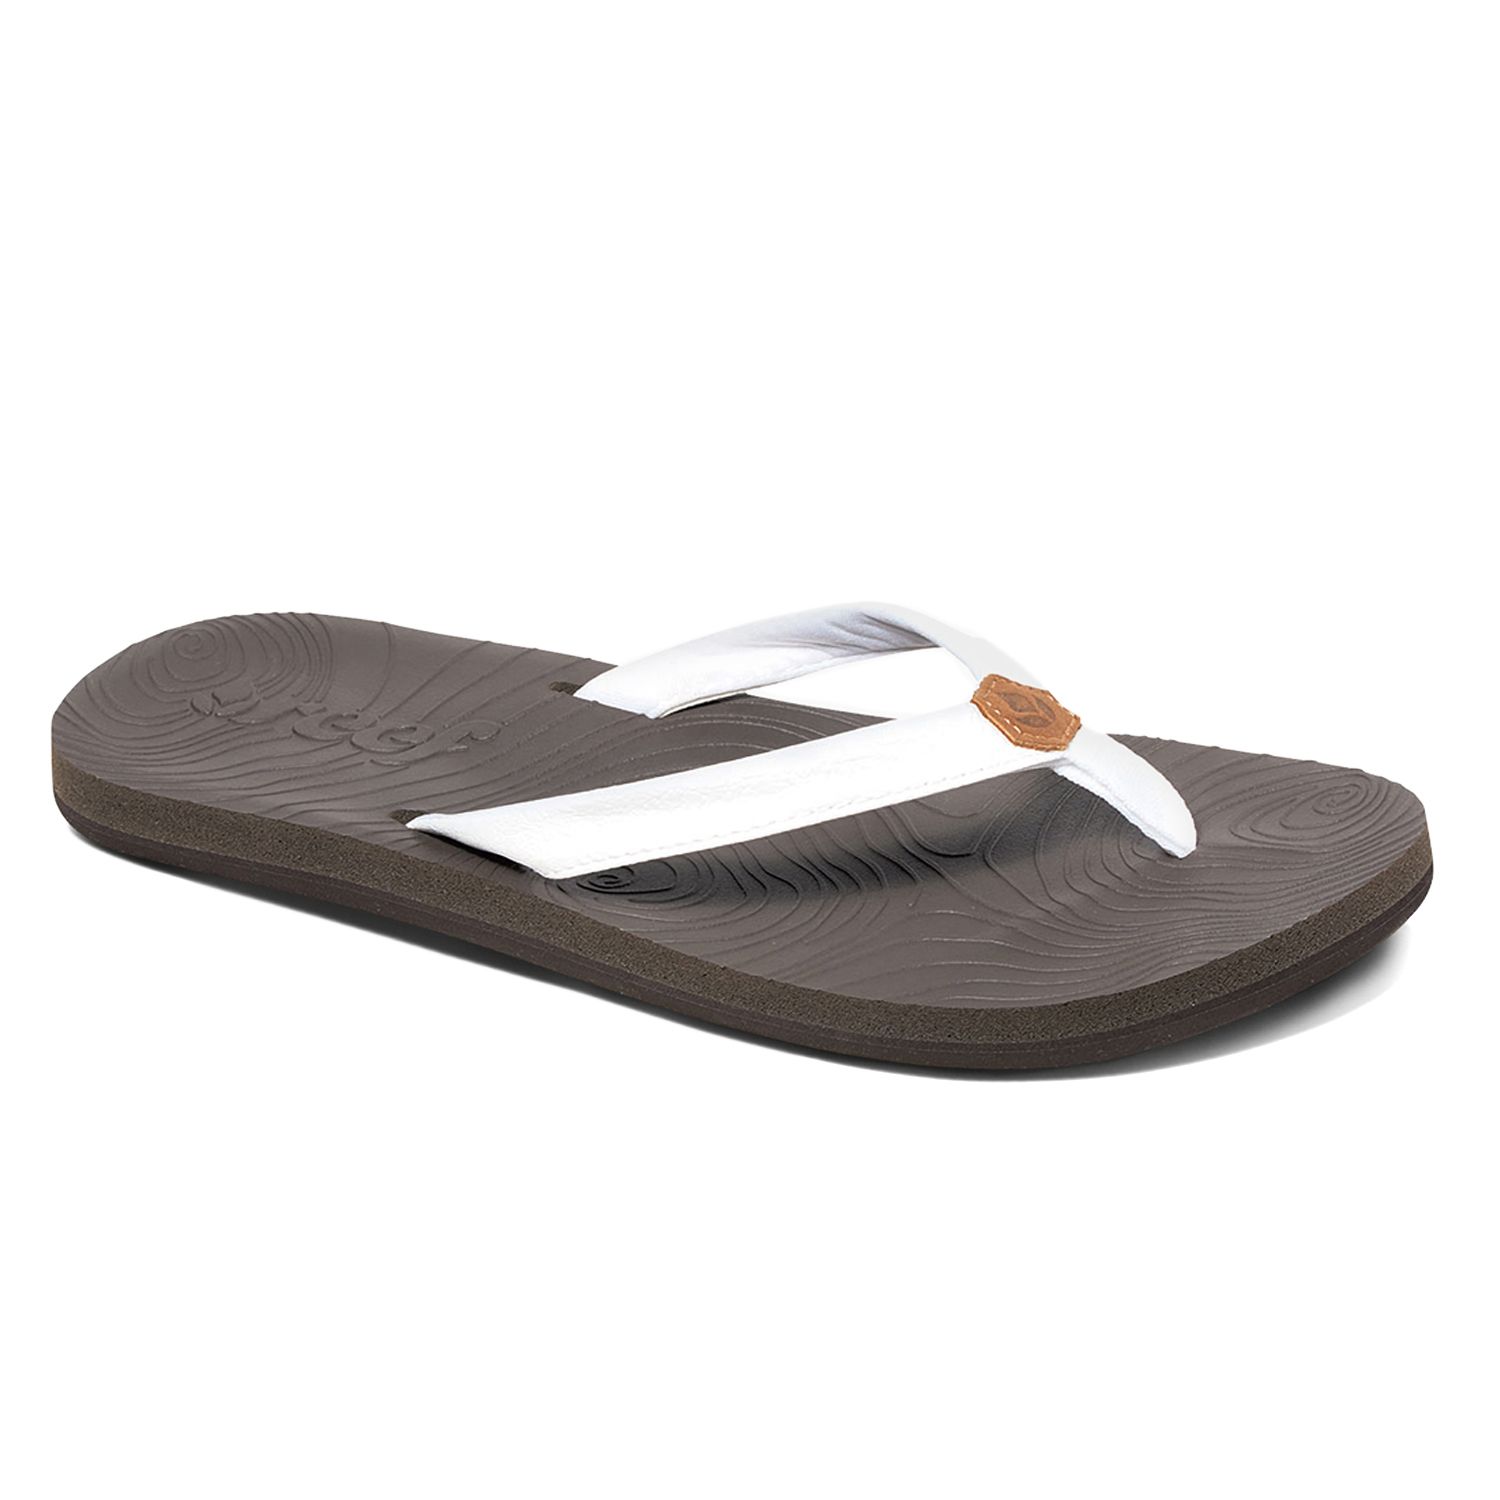 womans reef sandals